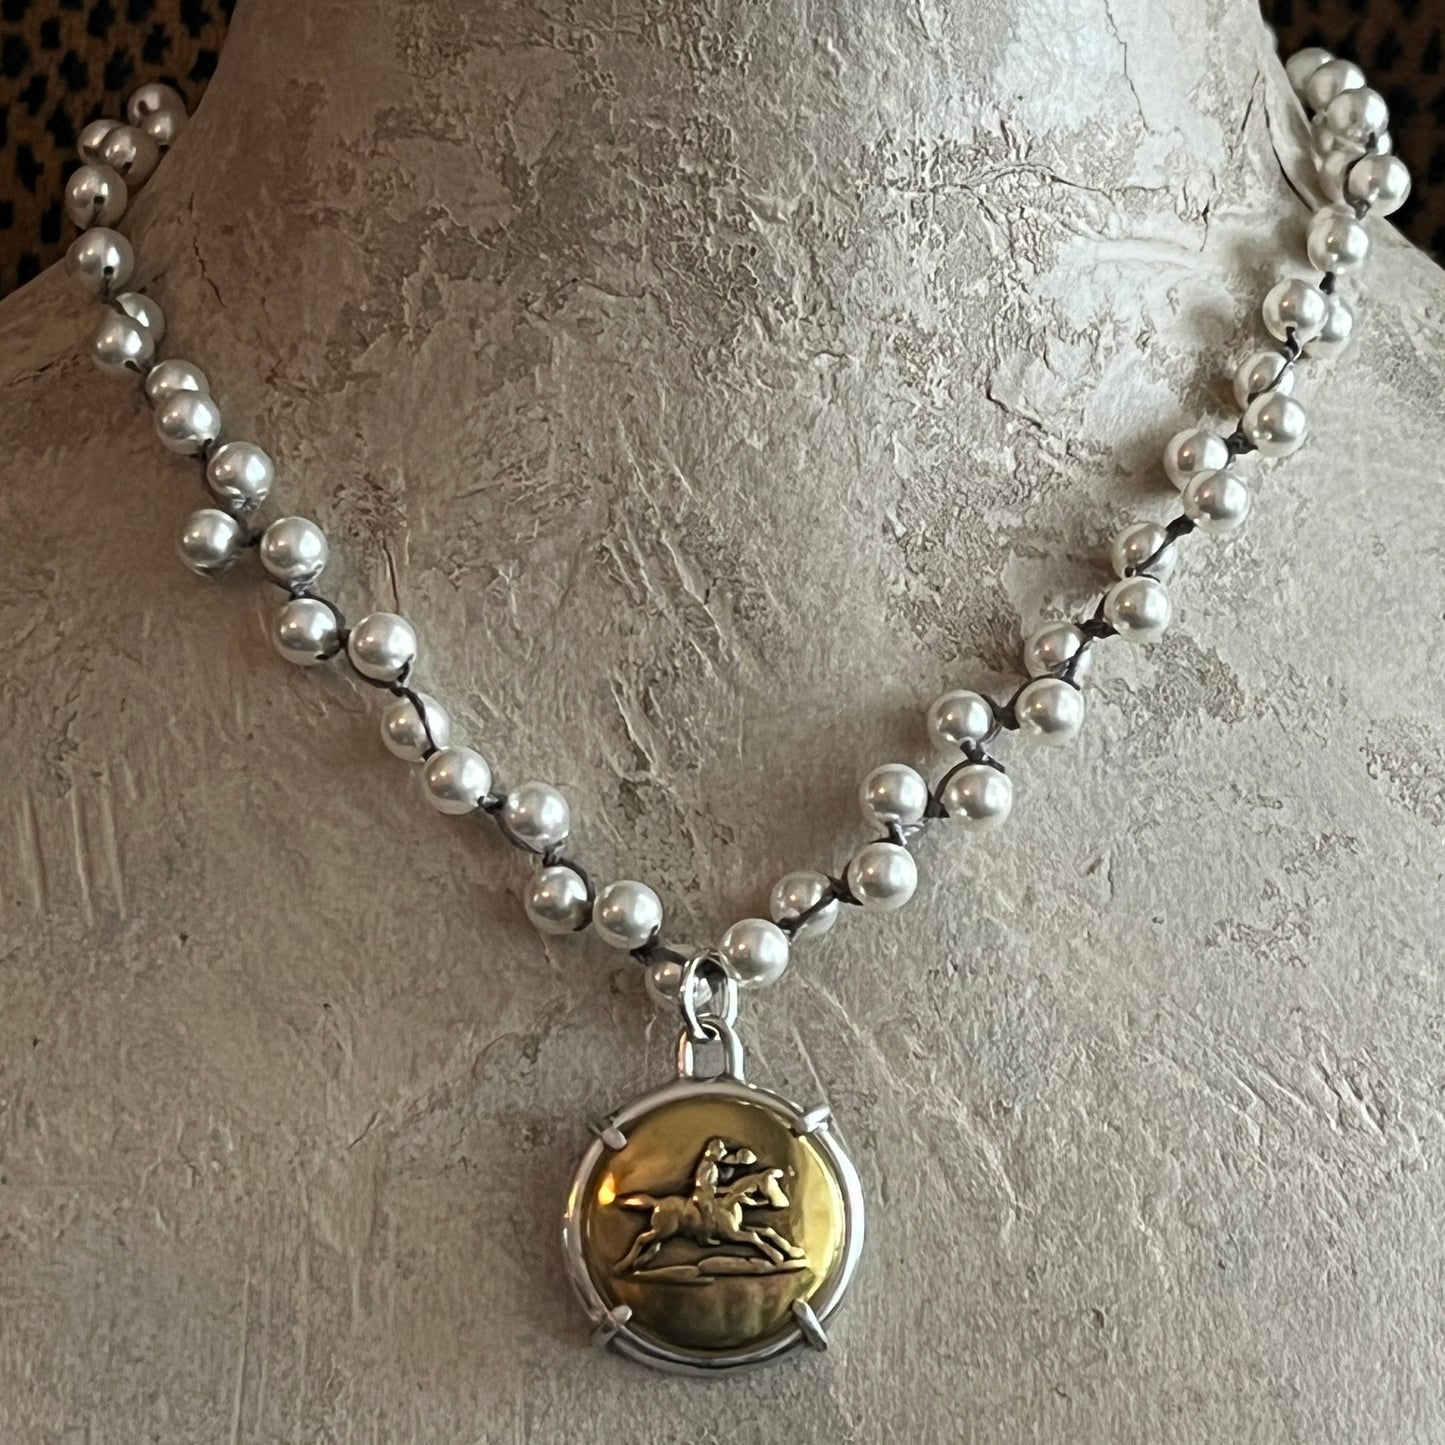 Vintage Brass Horse Button on Pearl Necklace